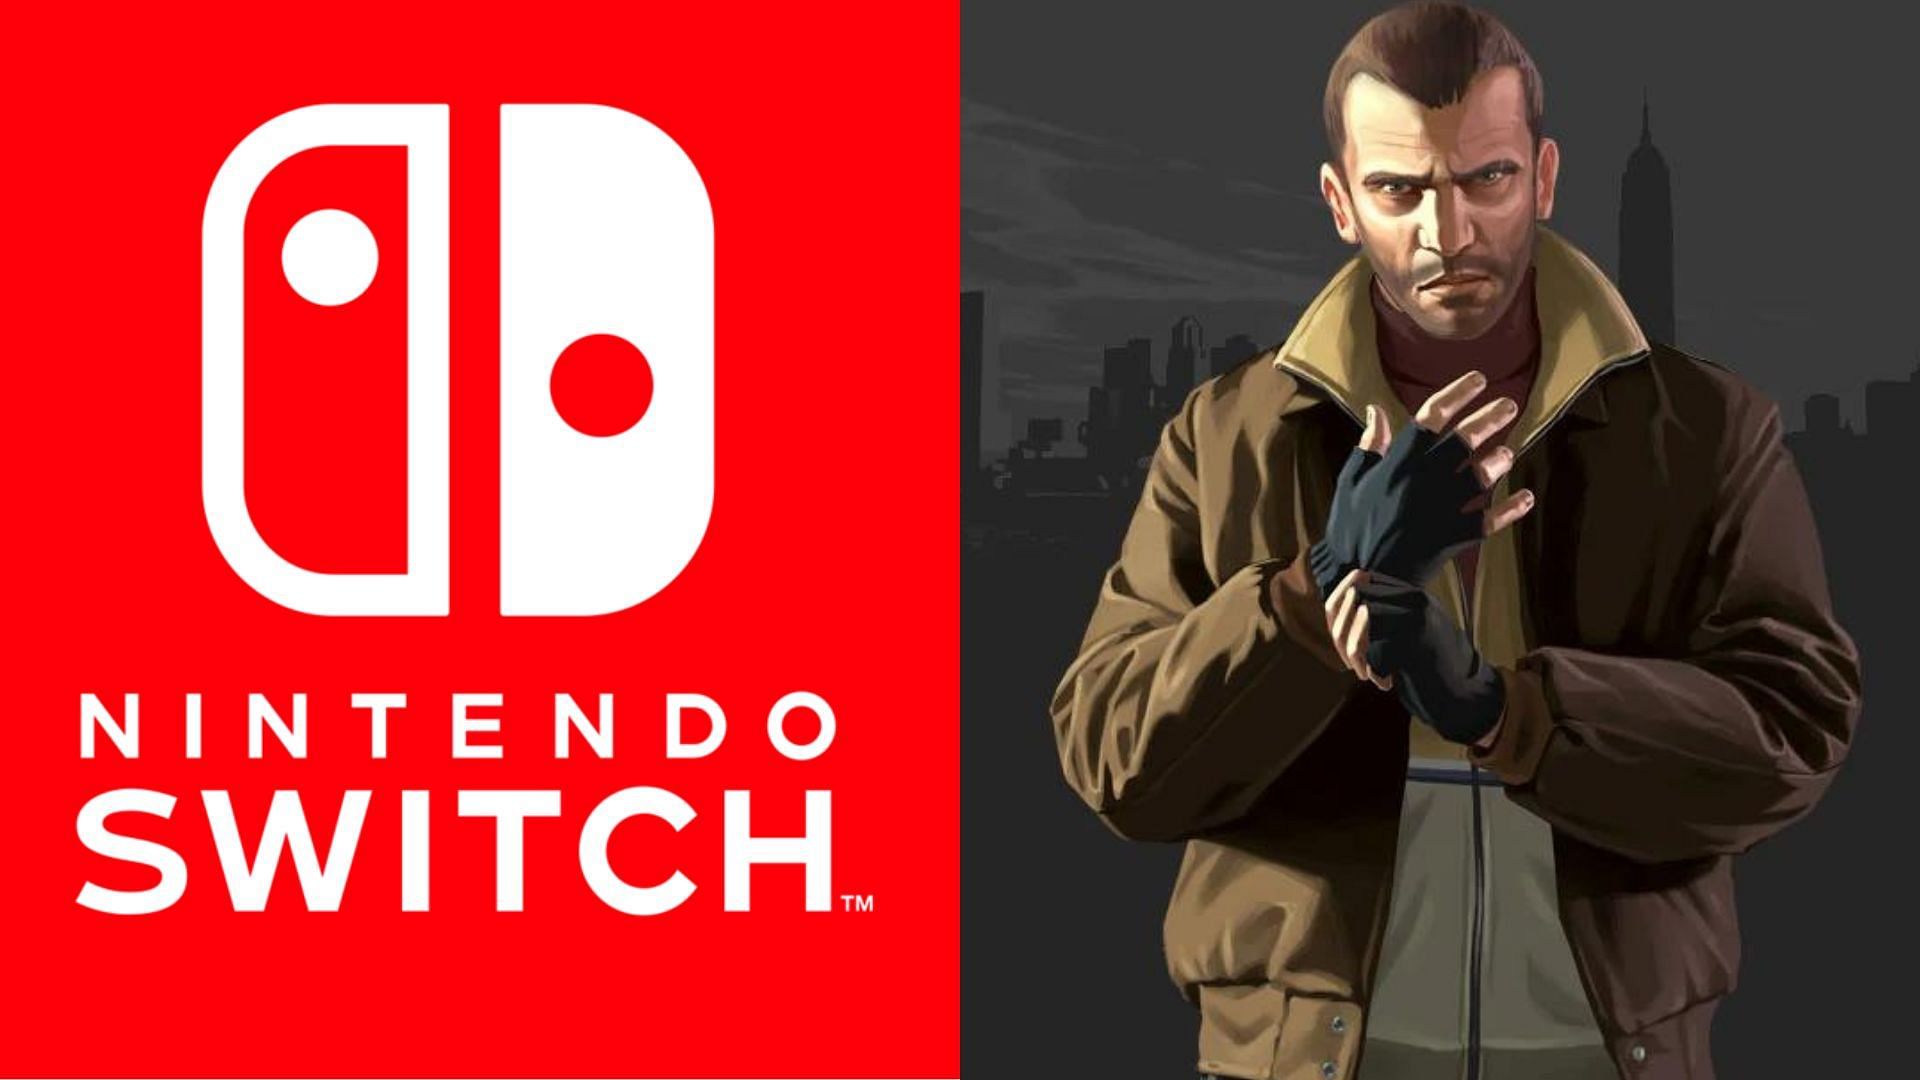 reasons why Nintendo Switch 2 should get a GTA 4 Remastered Edition